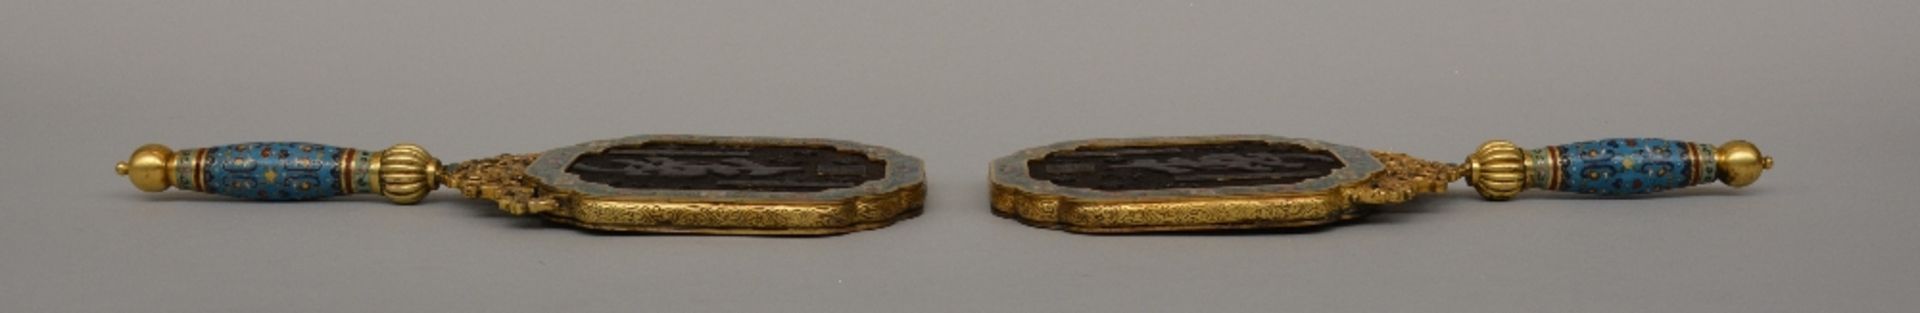 A pair of exceptional Chinese hand mirrors, gilt bronze and cloisonné decoration, the back side - Bild 6 aus 8